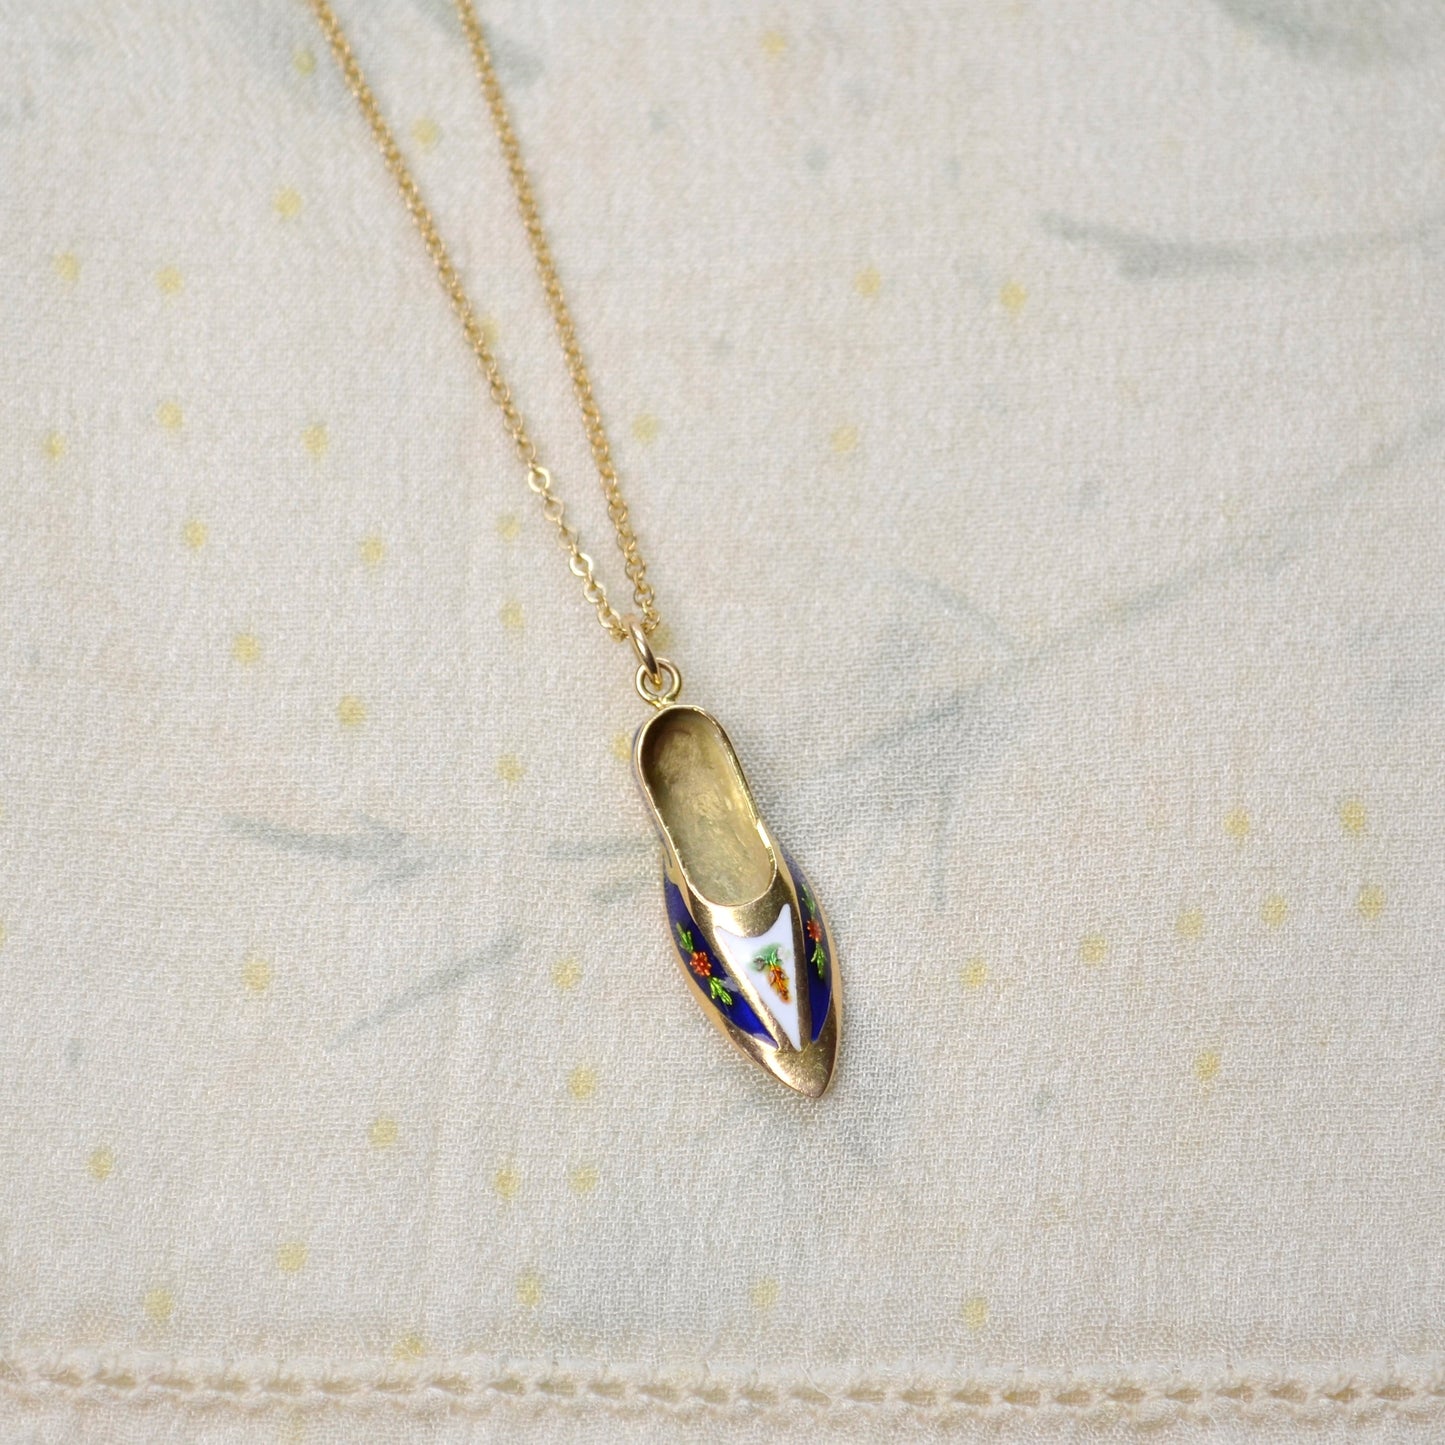 Enamel and Gold Slipper Necklace